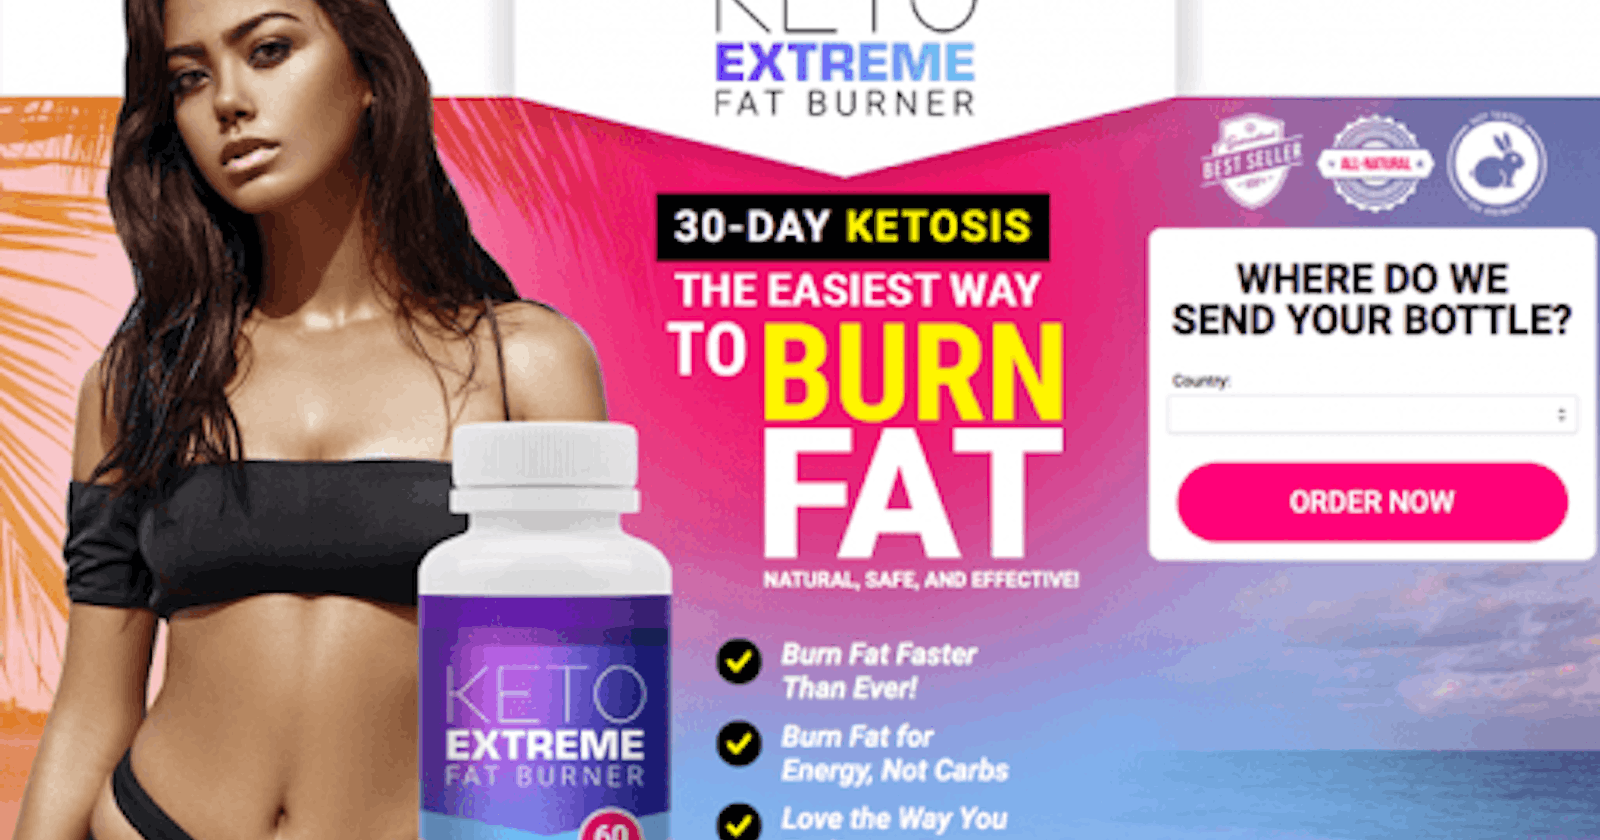 Keto Extreme Fat Burner  Scam or Really Help to reduce Weight Quickly